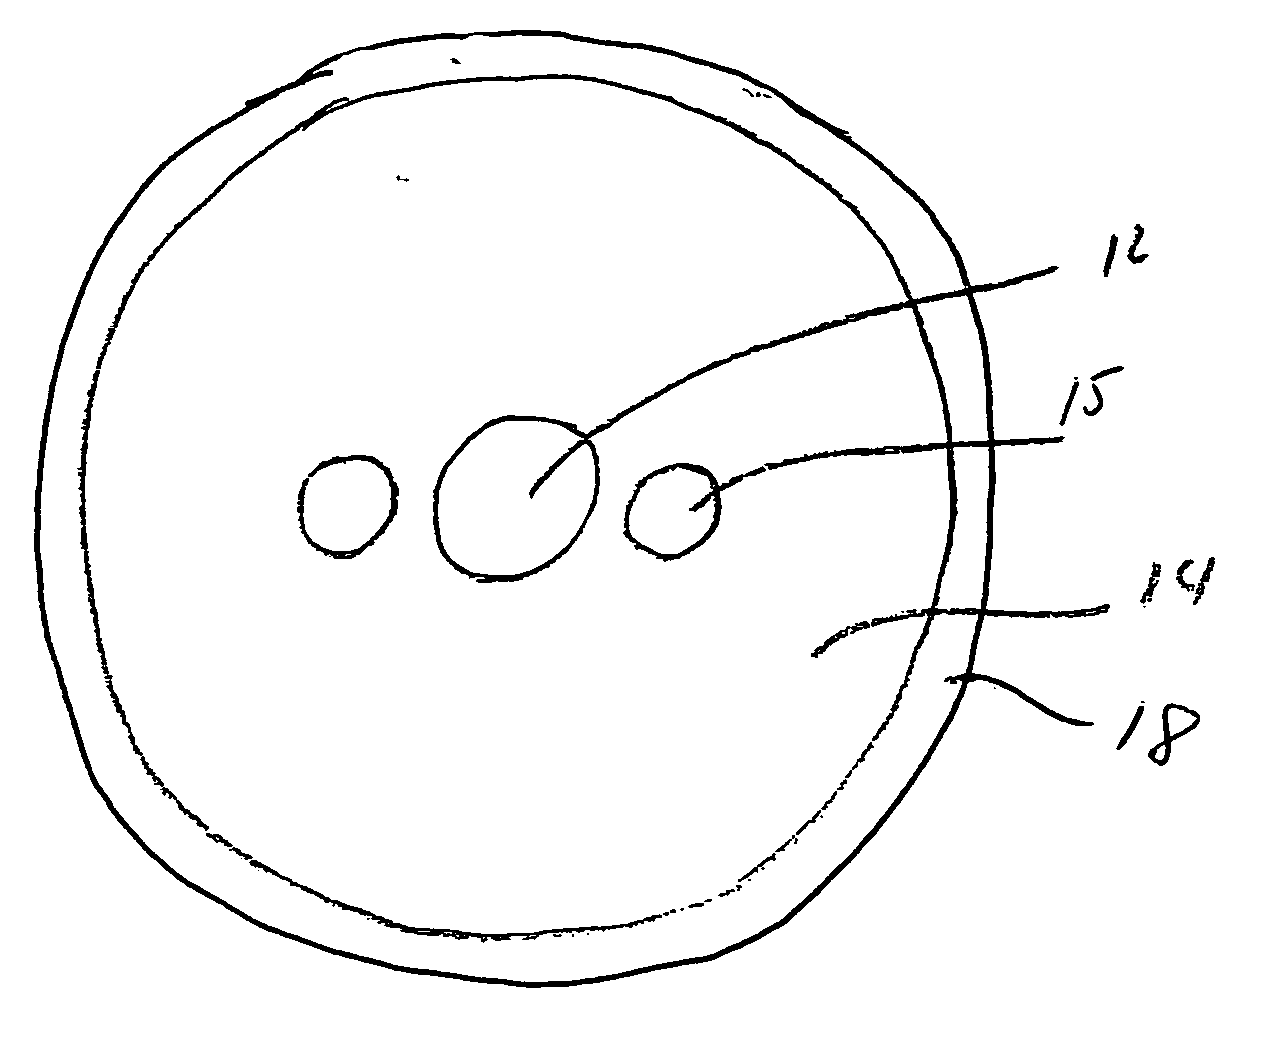 Optical systems utilizing optical fibers transmitting high power signal and a method of operating such systems